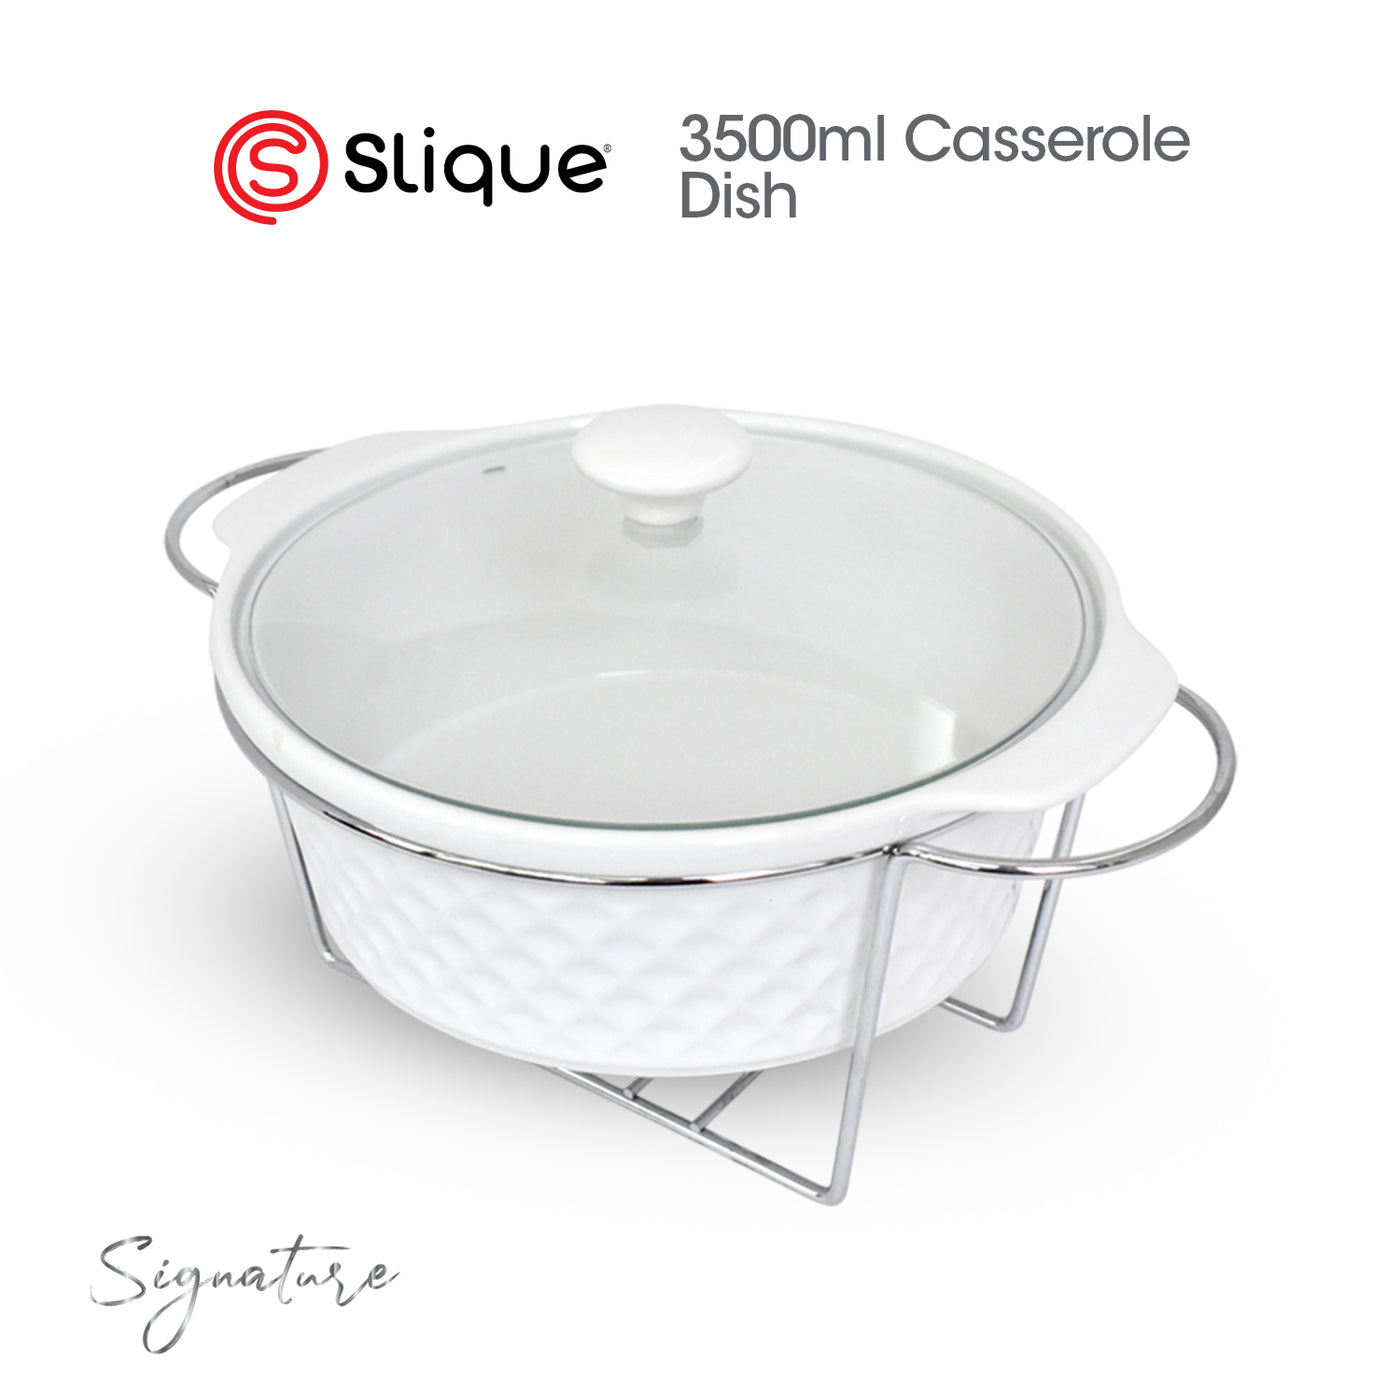 SLIQUE Premium Ceramic Round Casserole Dish with Silver Plated Tealight Candle Holder 3500ml